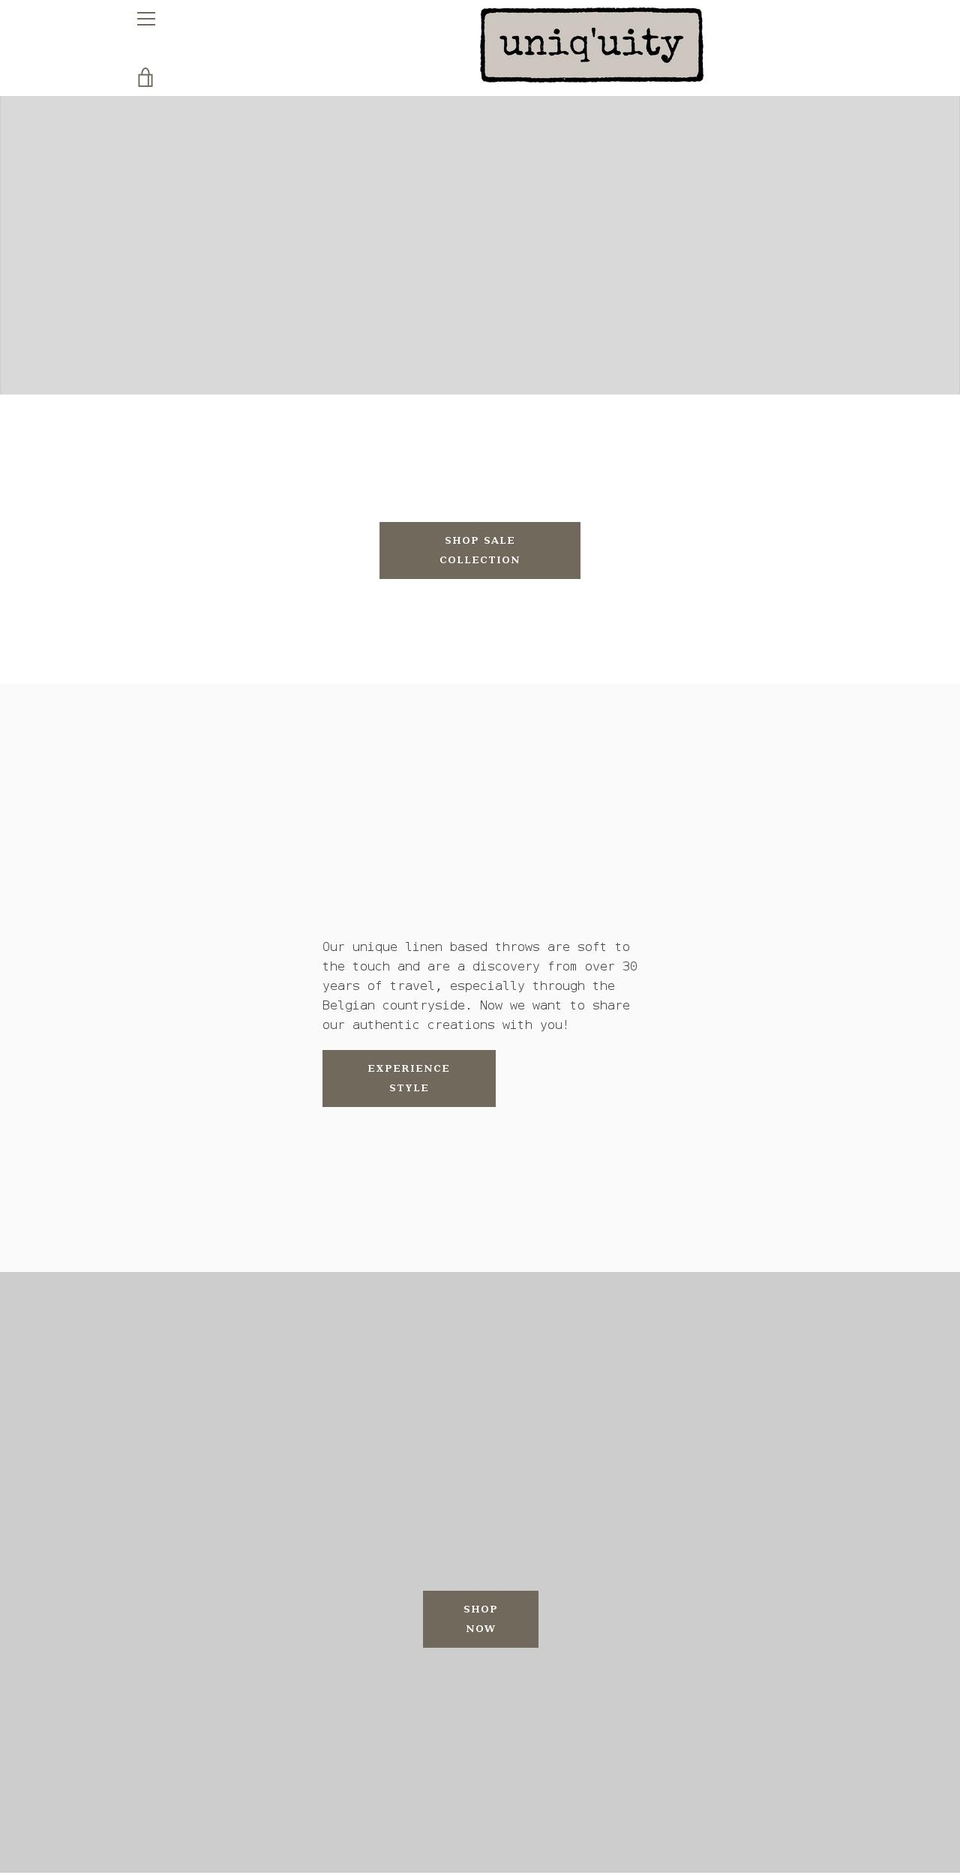 Narrative with Installments message Shopify theme site example uniquitystyle.com